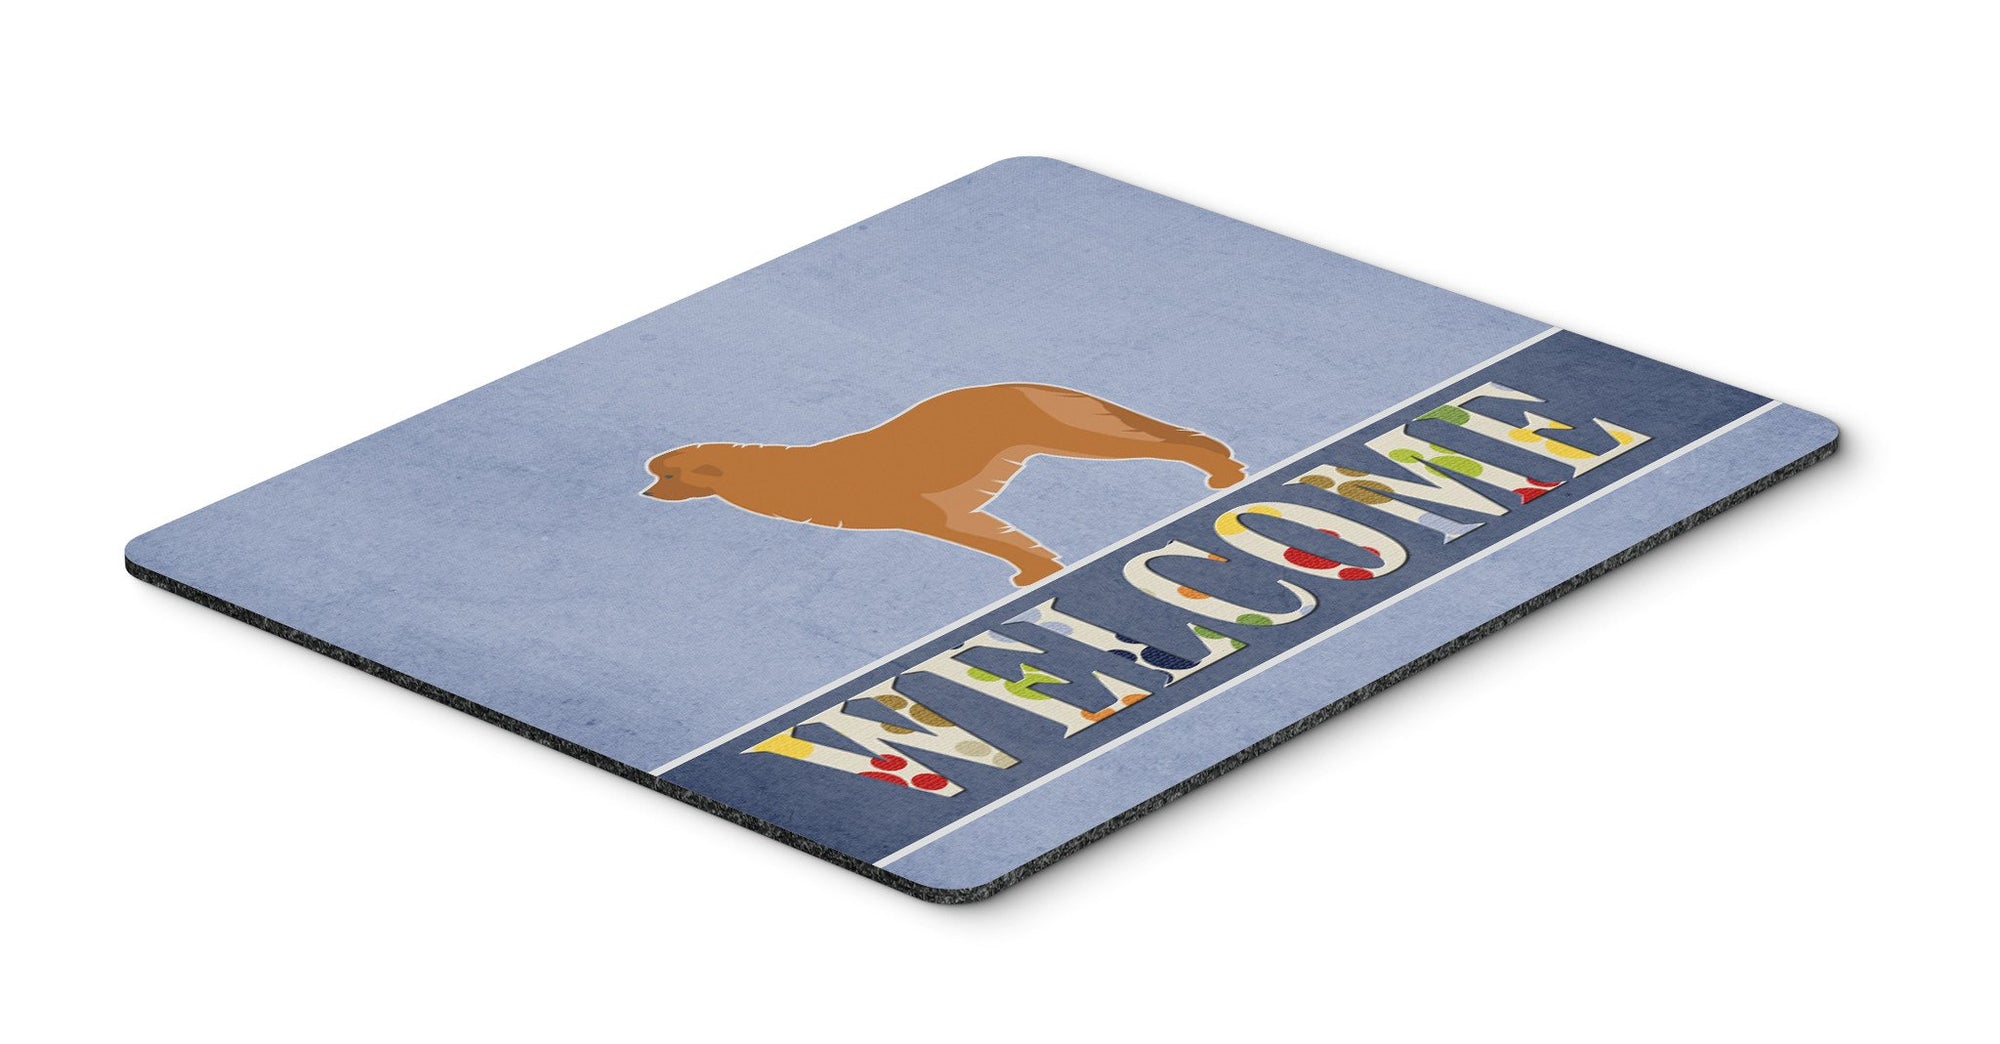 Leonberger Welcome Mouse Pad, Hot Pad or Trivet BB5562MP by Caroline's Treasures